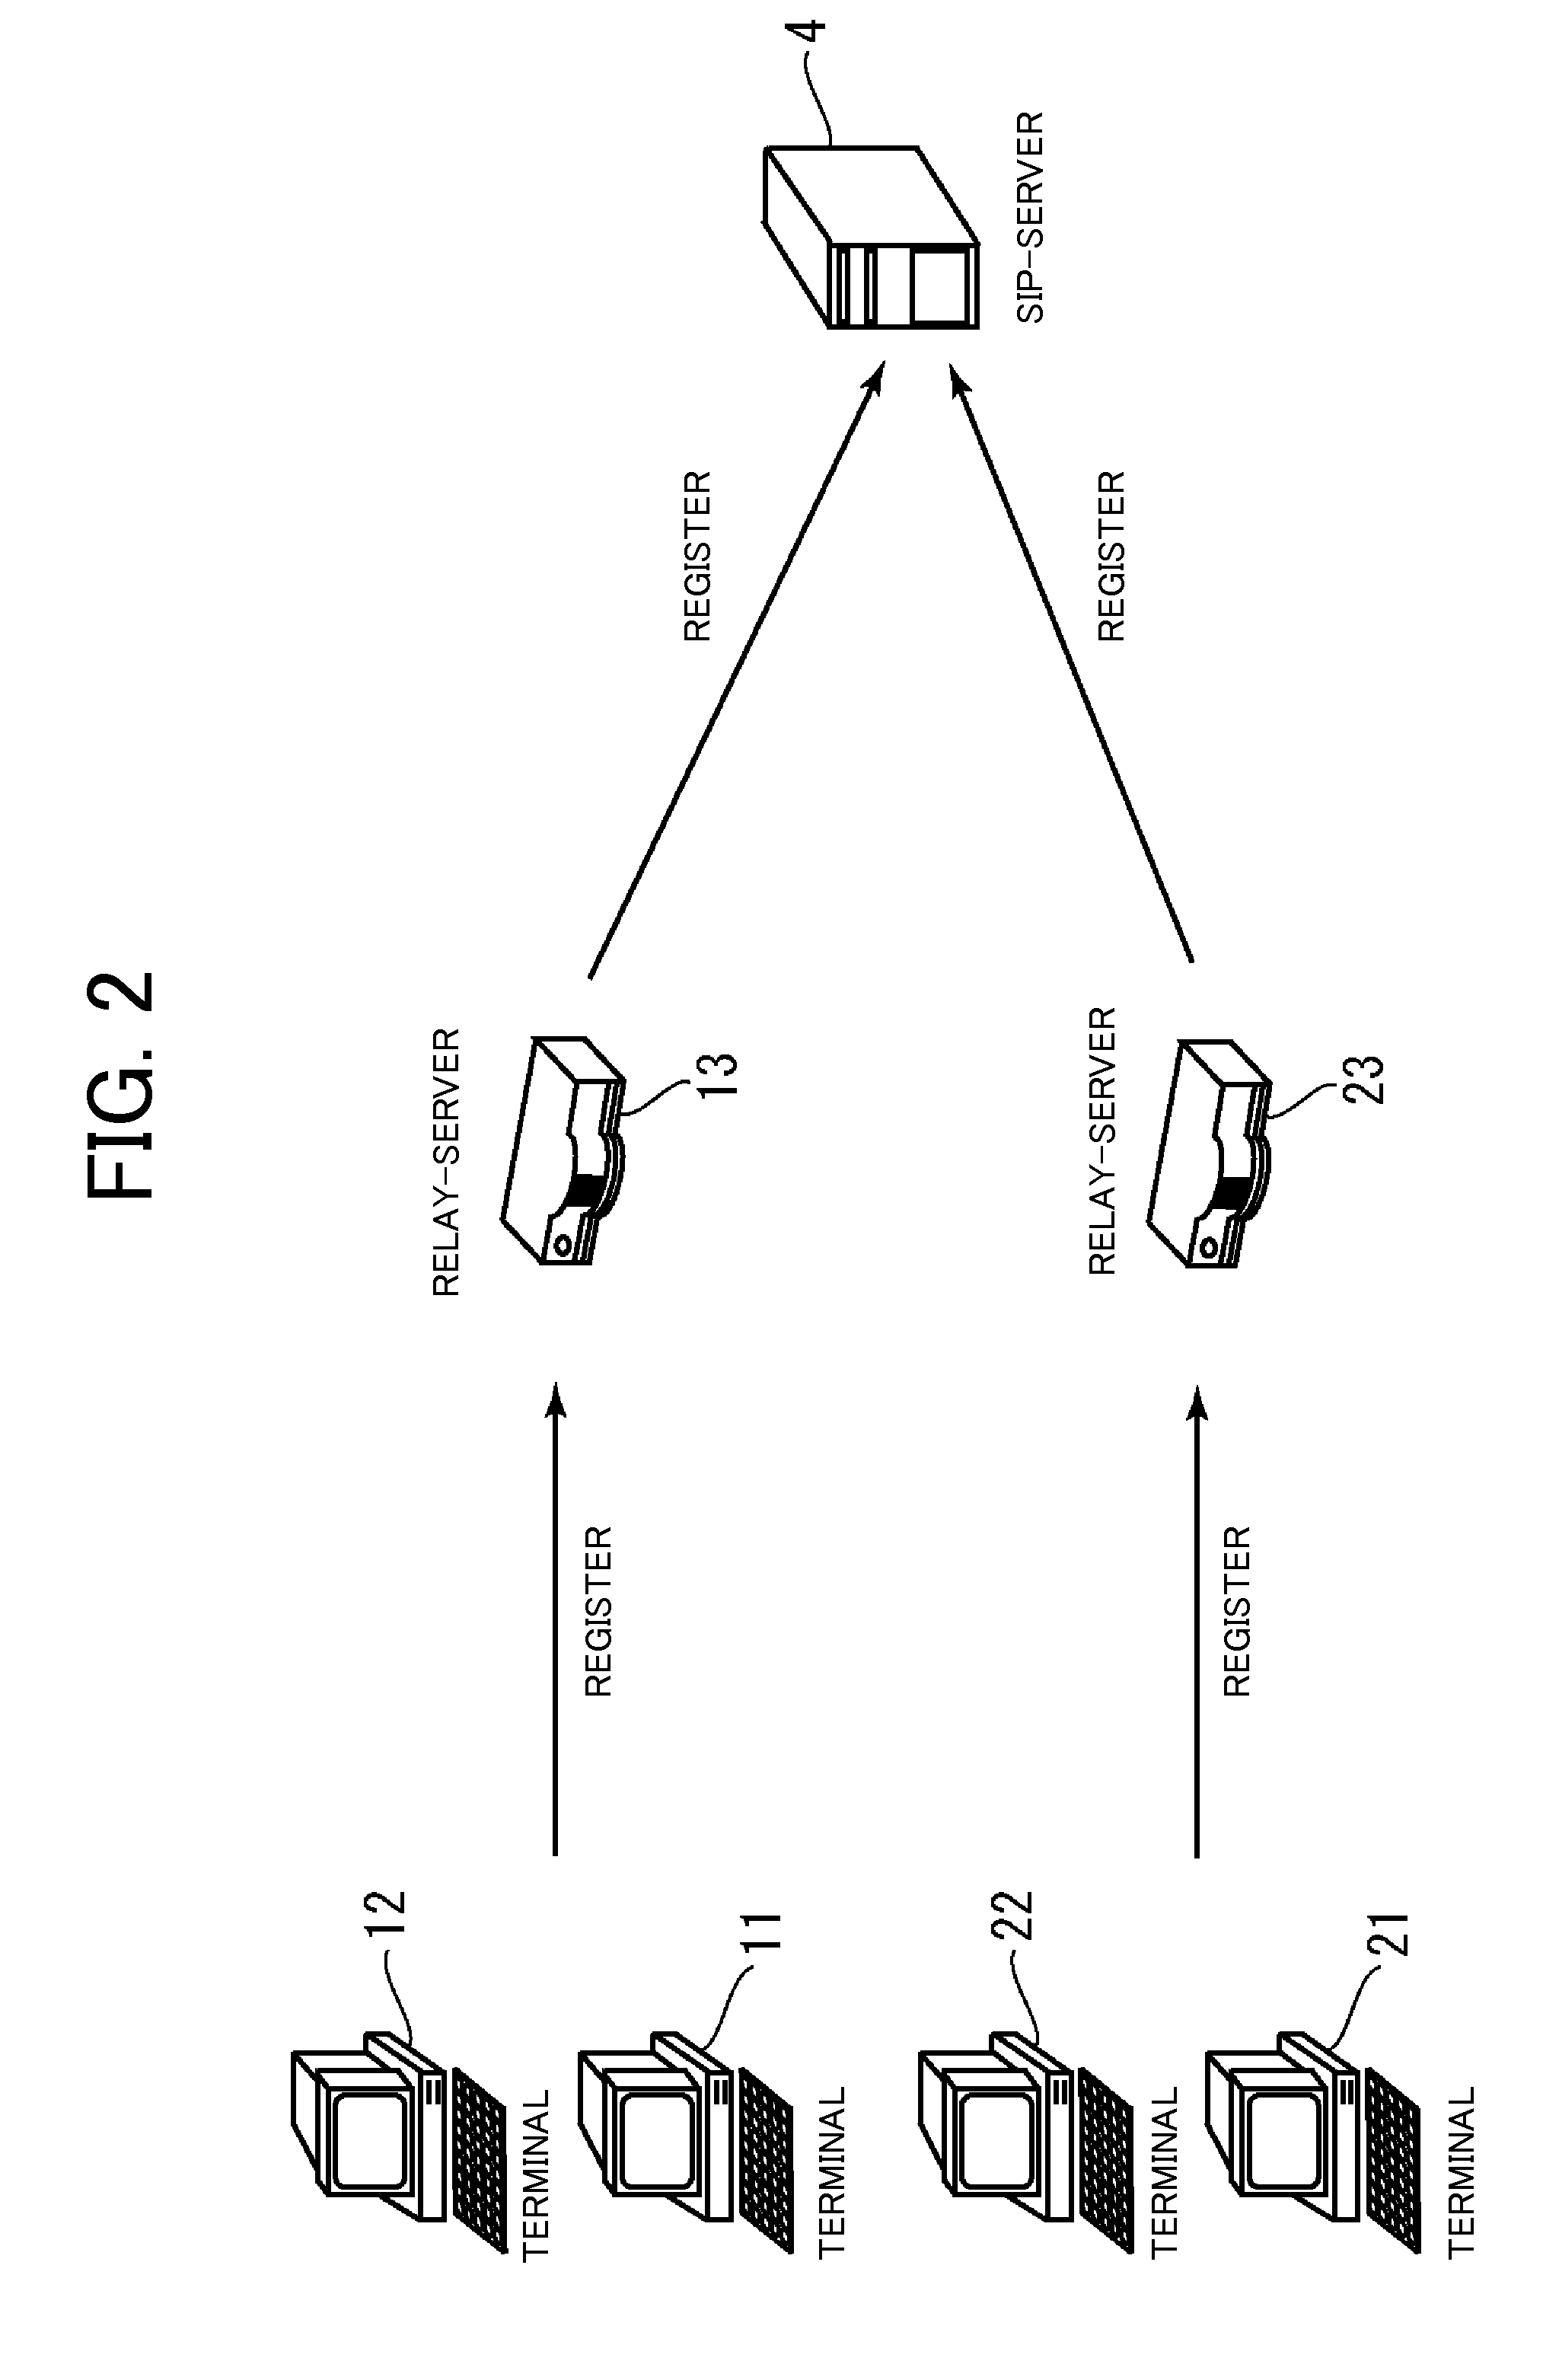 File server device arranged in a local area network and being communicable with an external server arranged in a wide area network